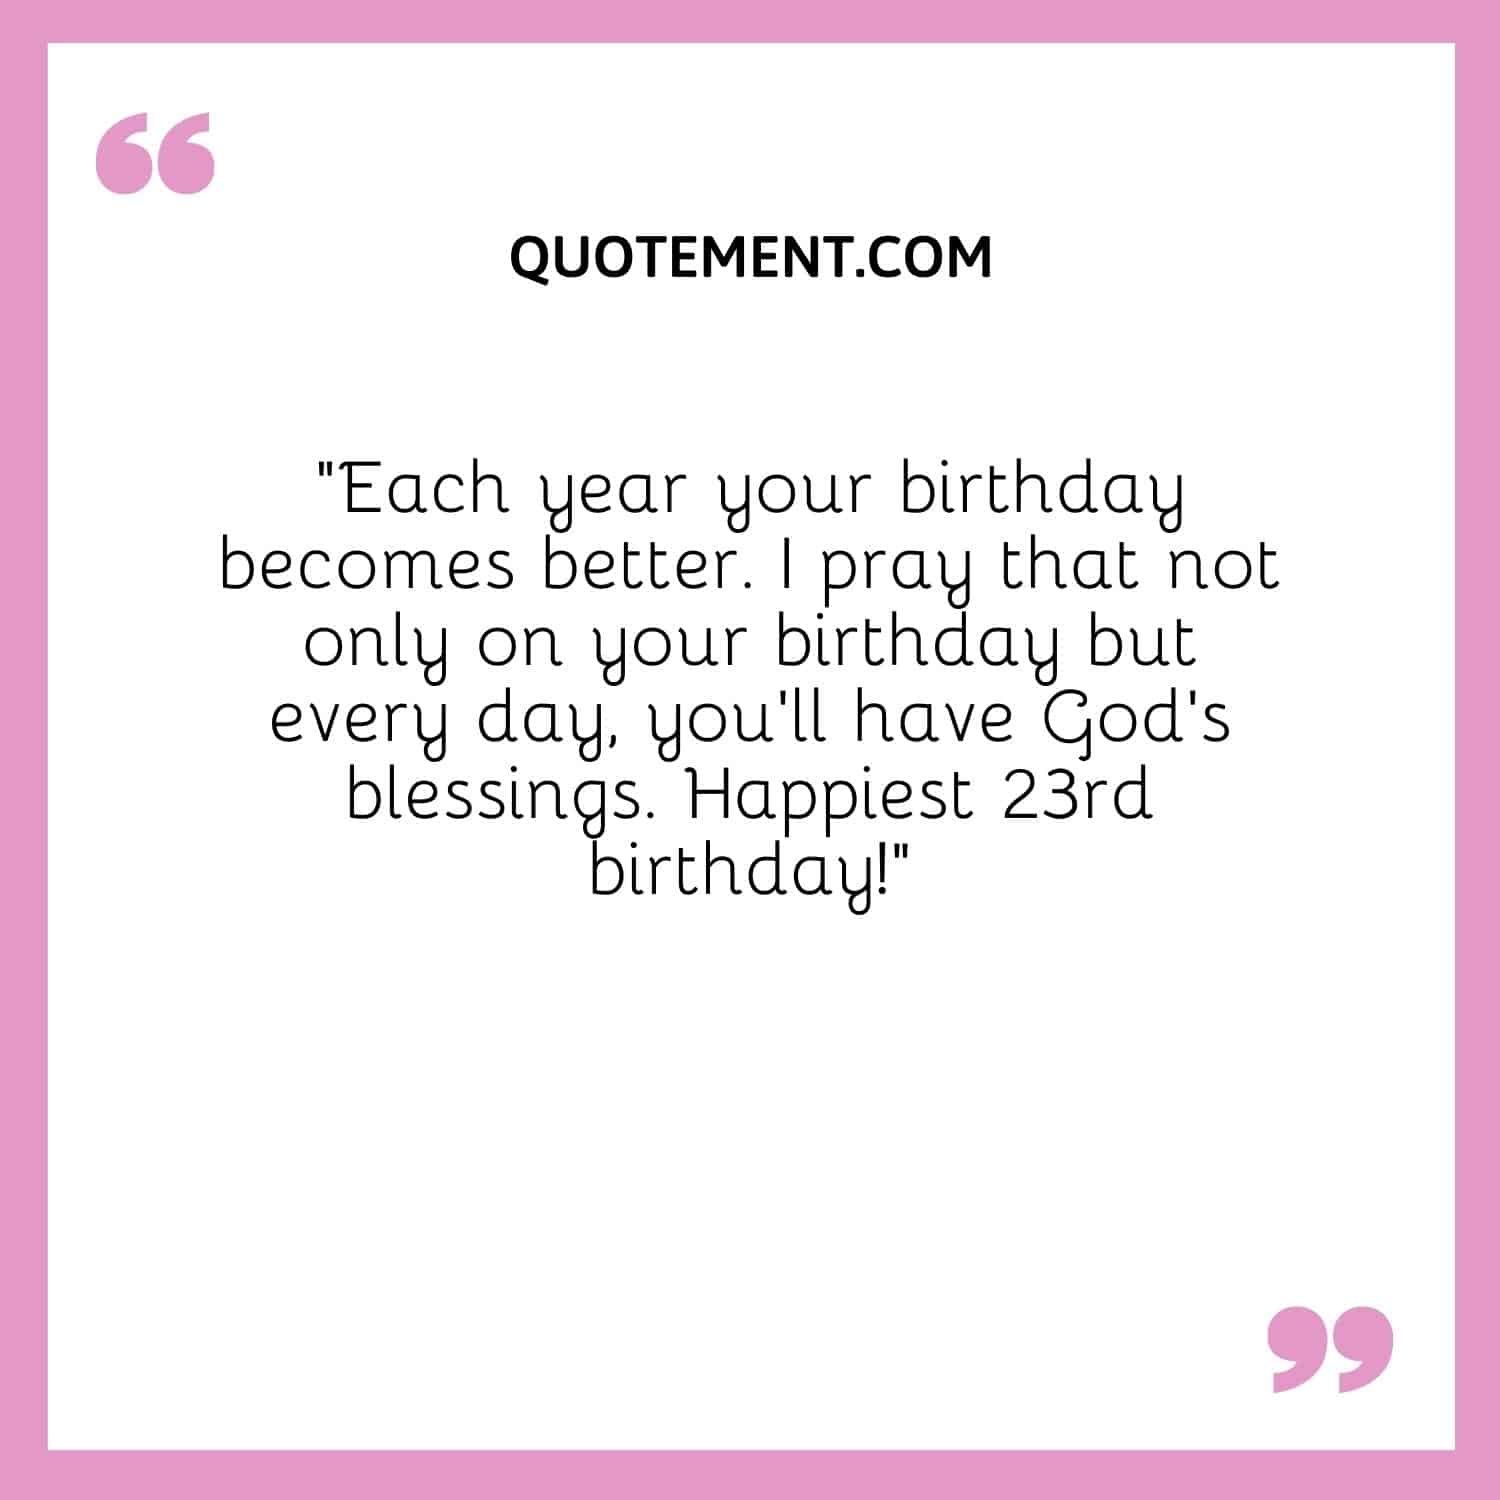 I pray that not only on your birthday but every day, you’ll have God’s blessings